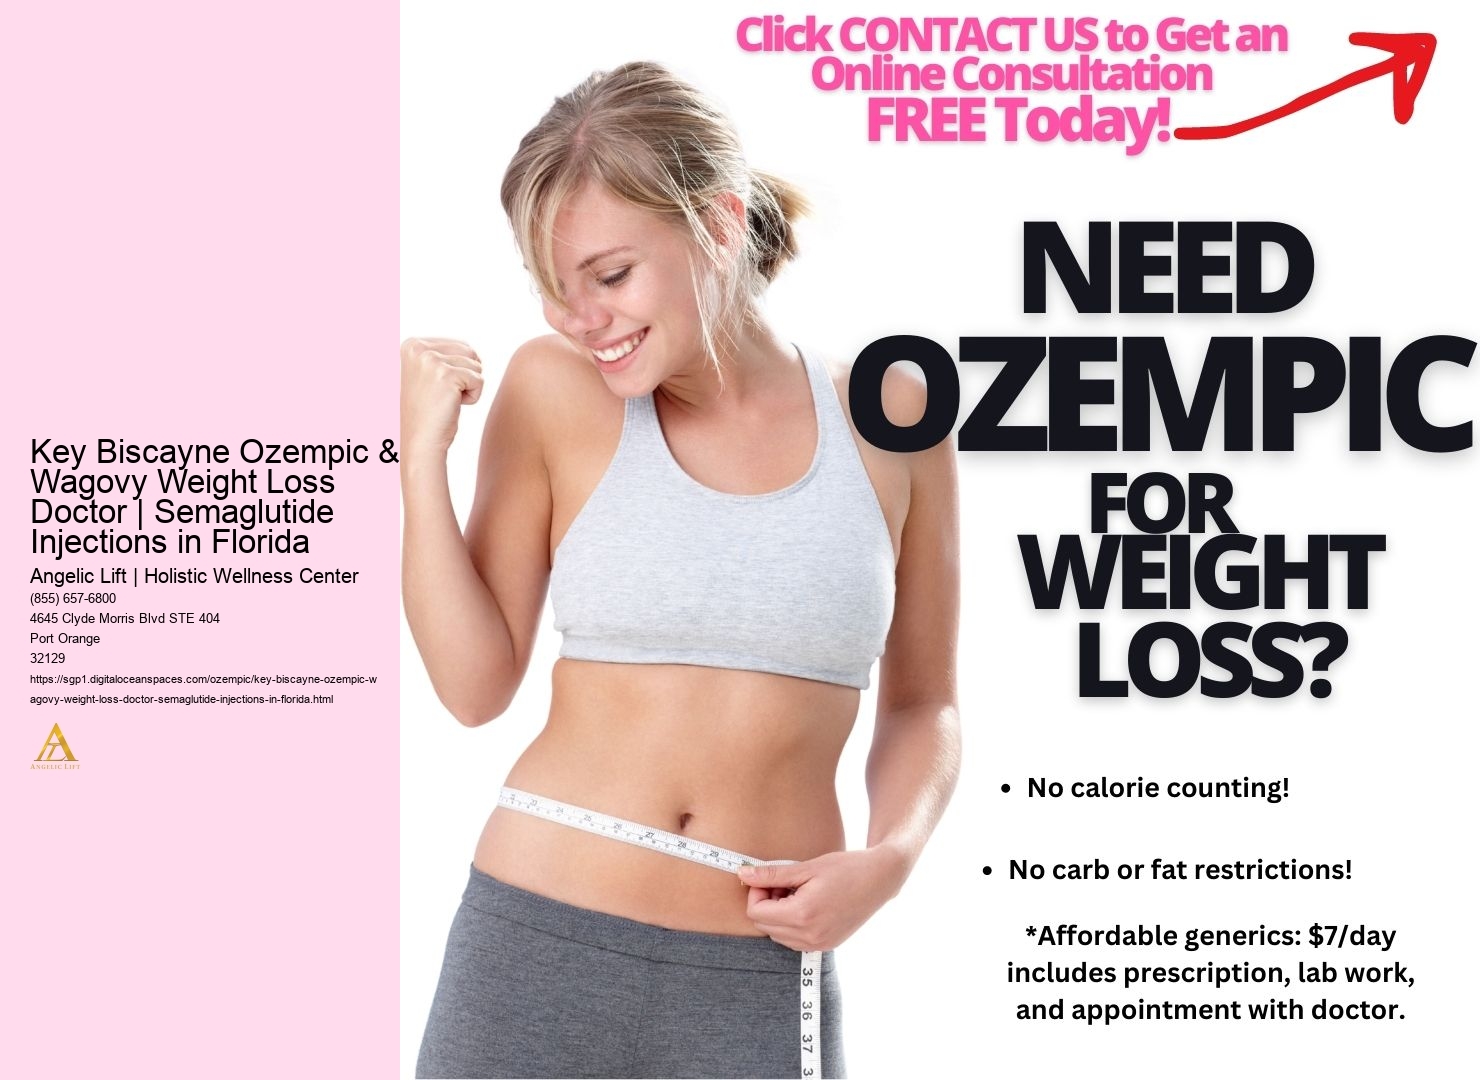 Key Biscayne Ozempic & Wagovy Weight Loss Doctor | Semaglutide Injections in Florida